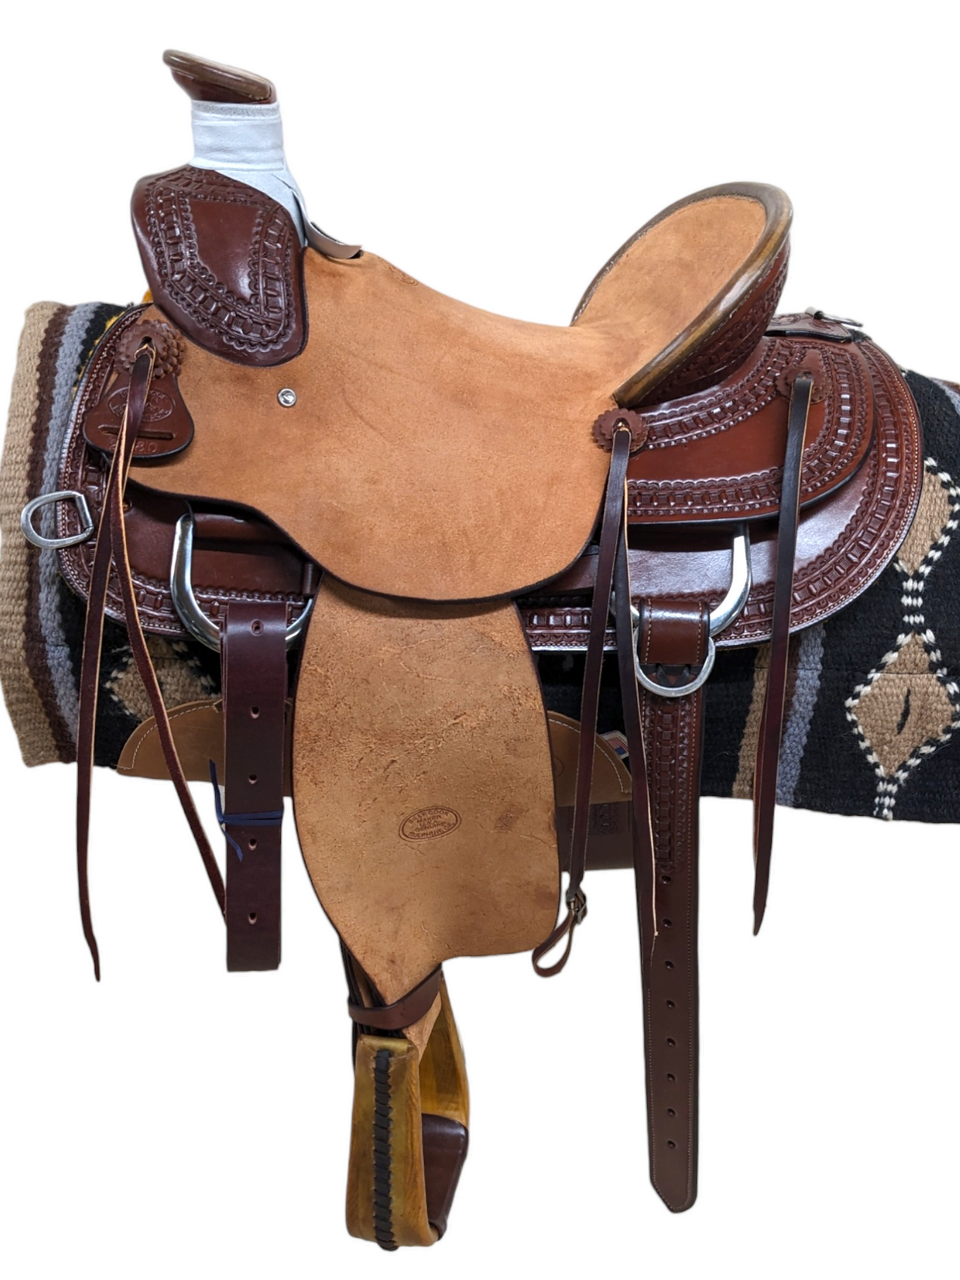 15.5" Billy Cook Mule Saddle